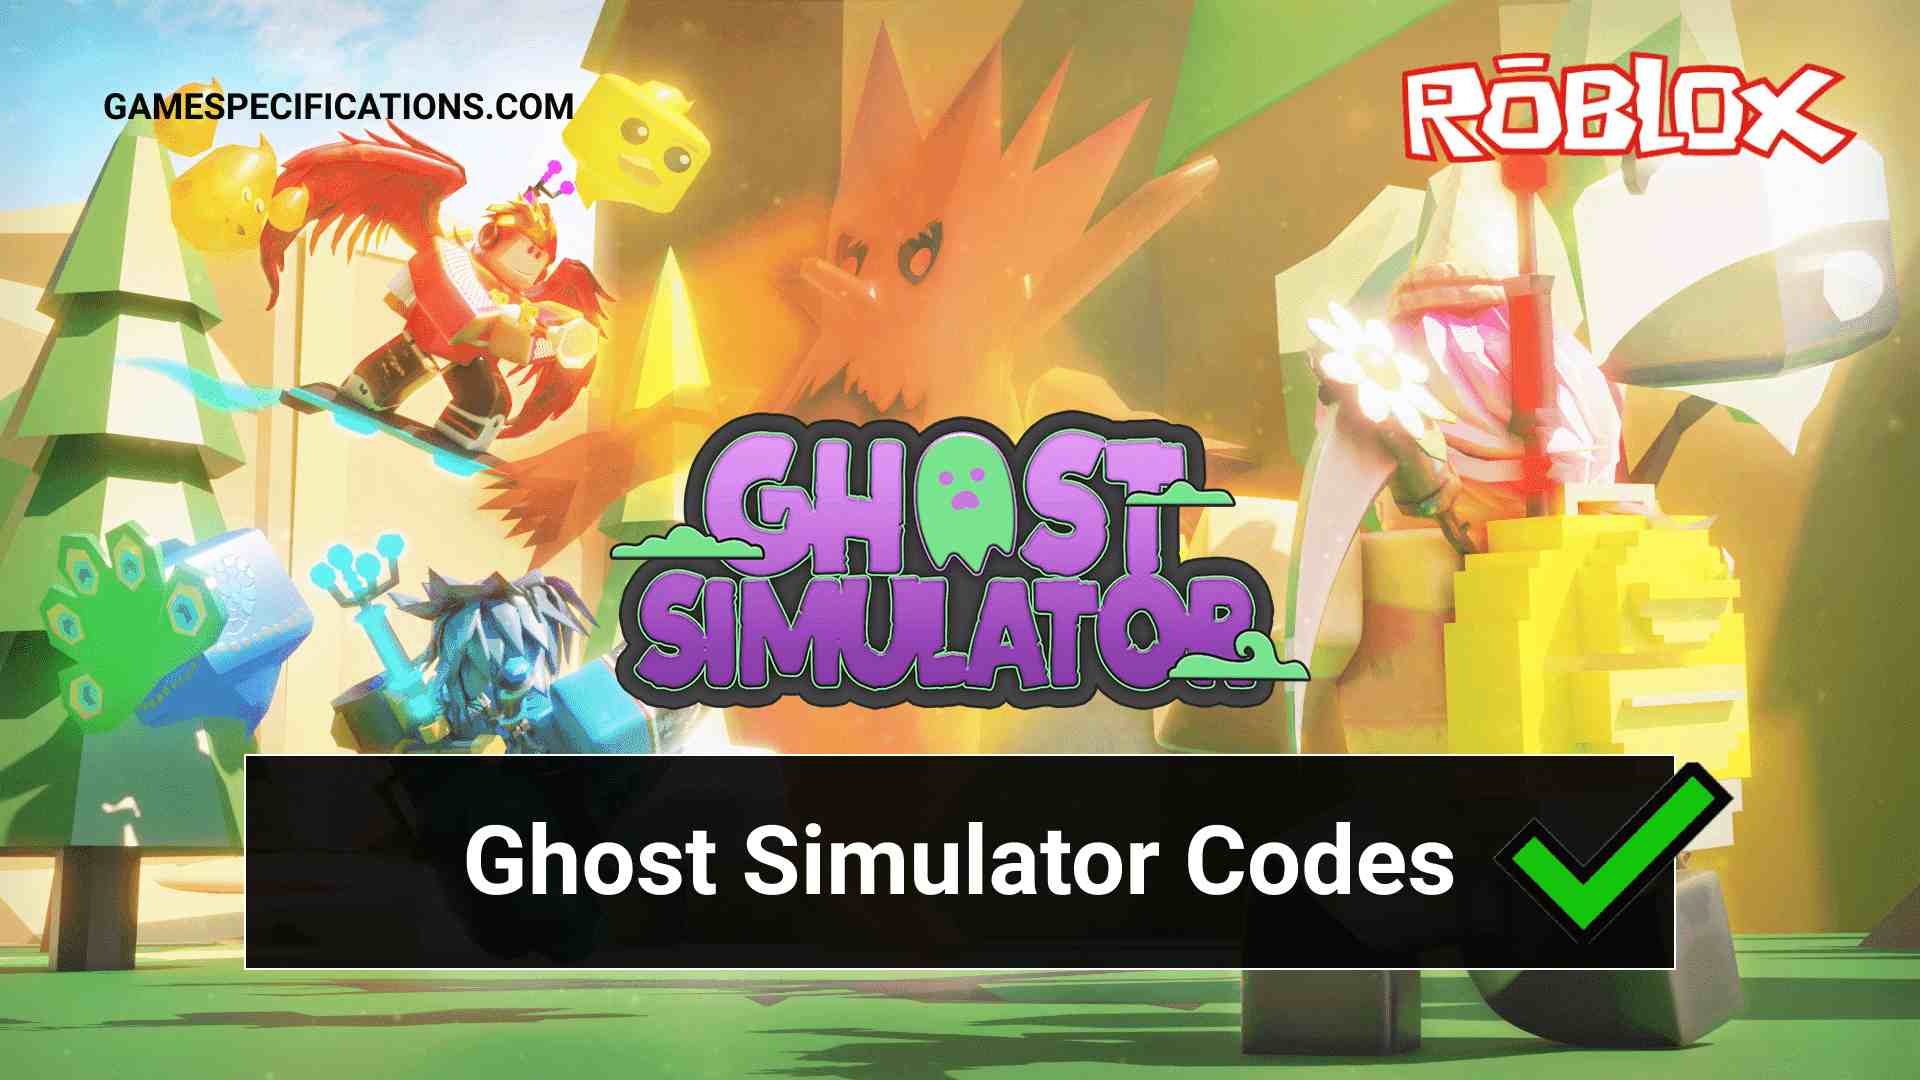 55 Roblox Ghost Simulator Codes To Get Free Rewards July 2021 Game Specifications - codes for ghost simulator roblox